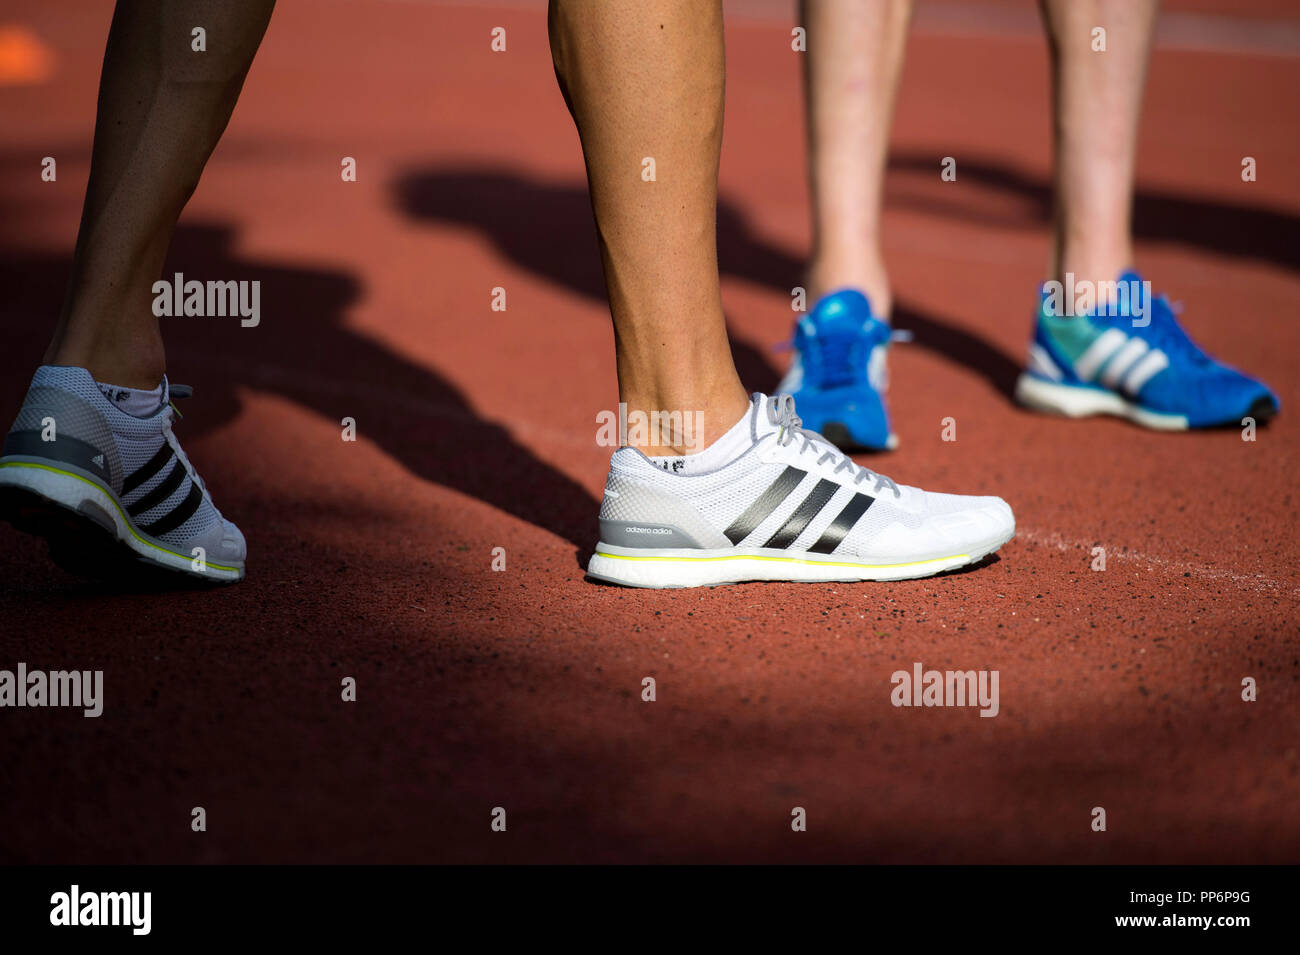 Running: Adidas running shoes on a running track during a training Stock  Photo - Alamy